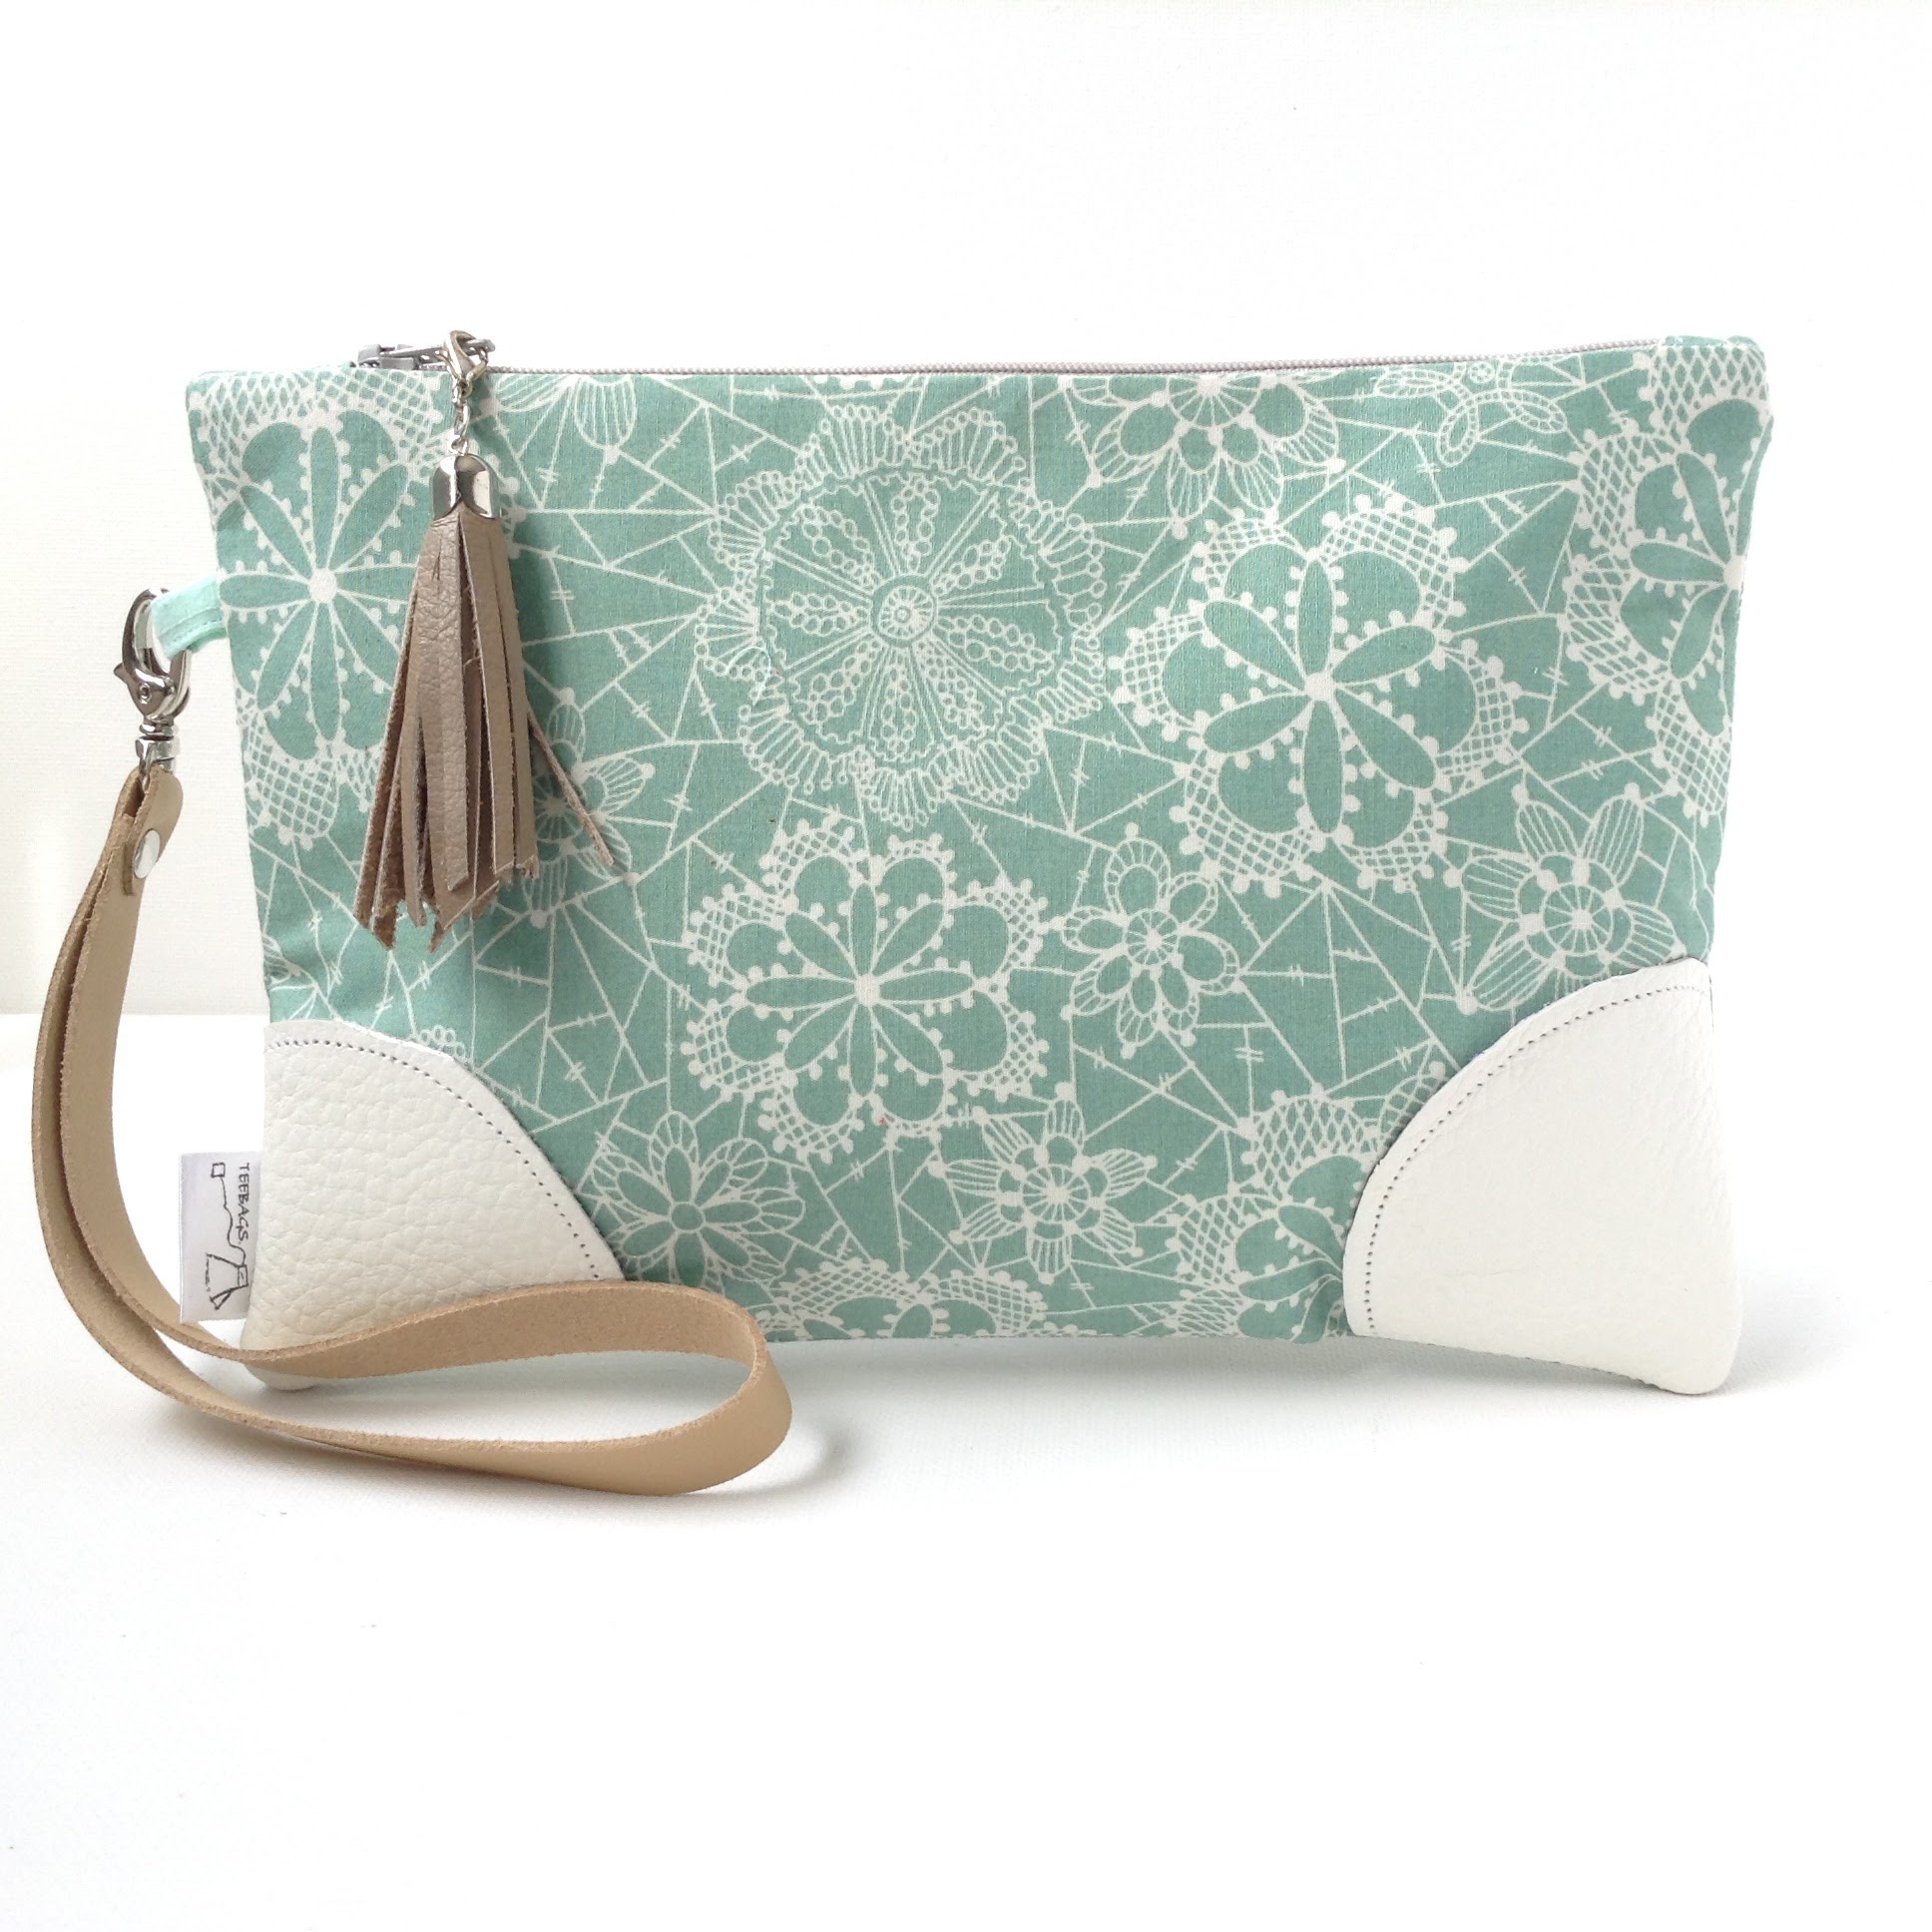 Cotton Clutch Purse with Wrist Strap and Leather Details